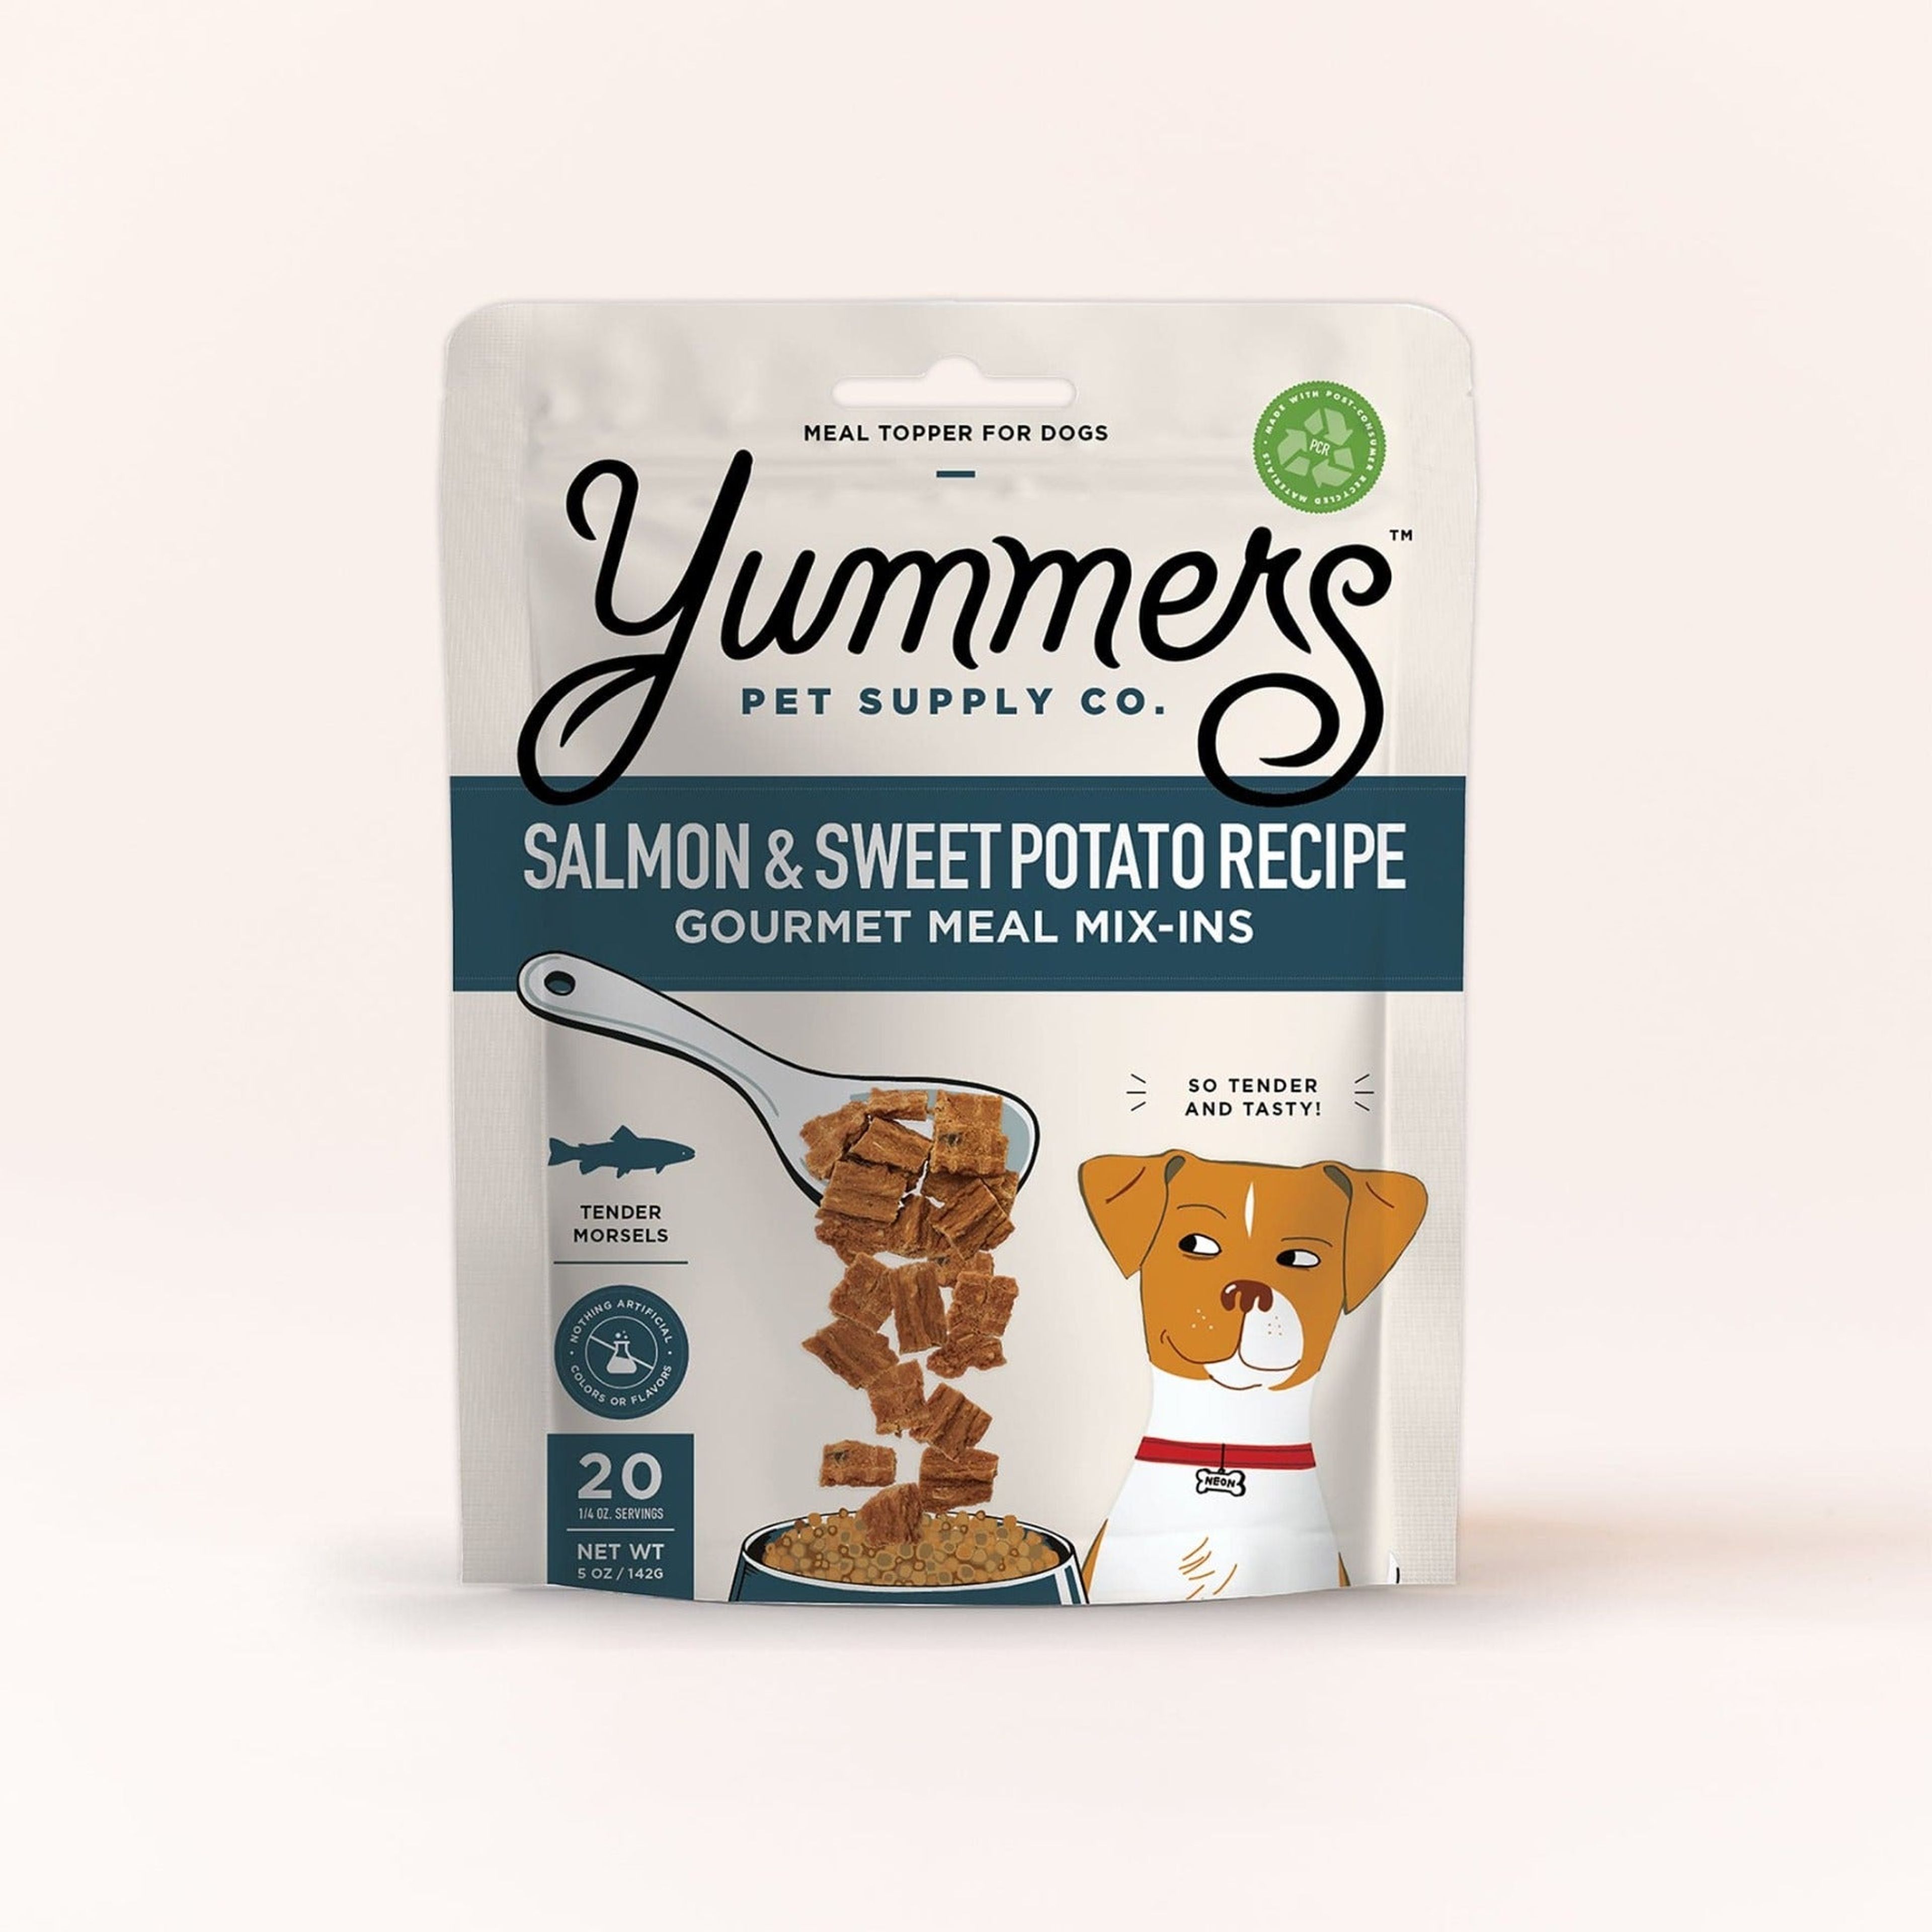 Salmon & Sweet Potato Recipe Gourmet Meal Mix-in for Dogs, 5 oz.